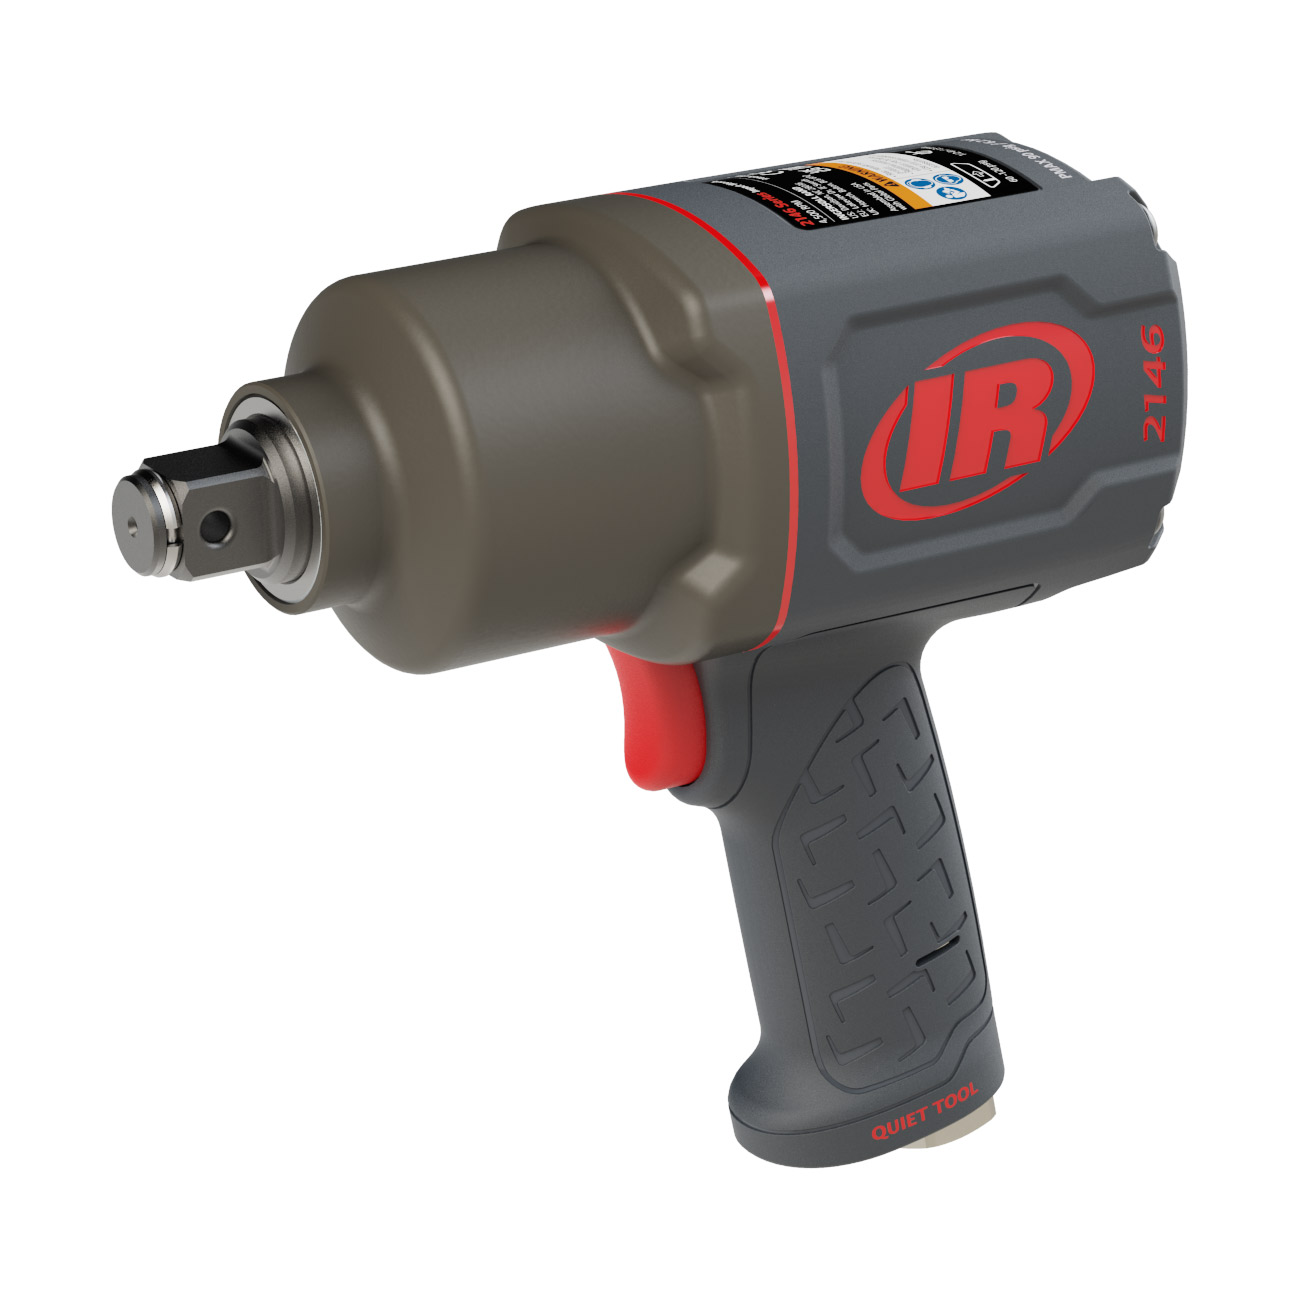 2146Q1MAX 3/4"" Air Impact Wrench - Angled view